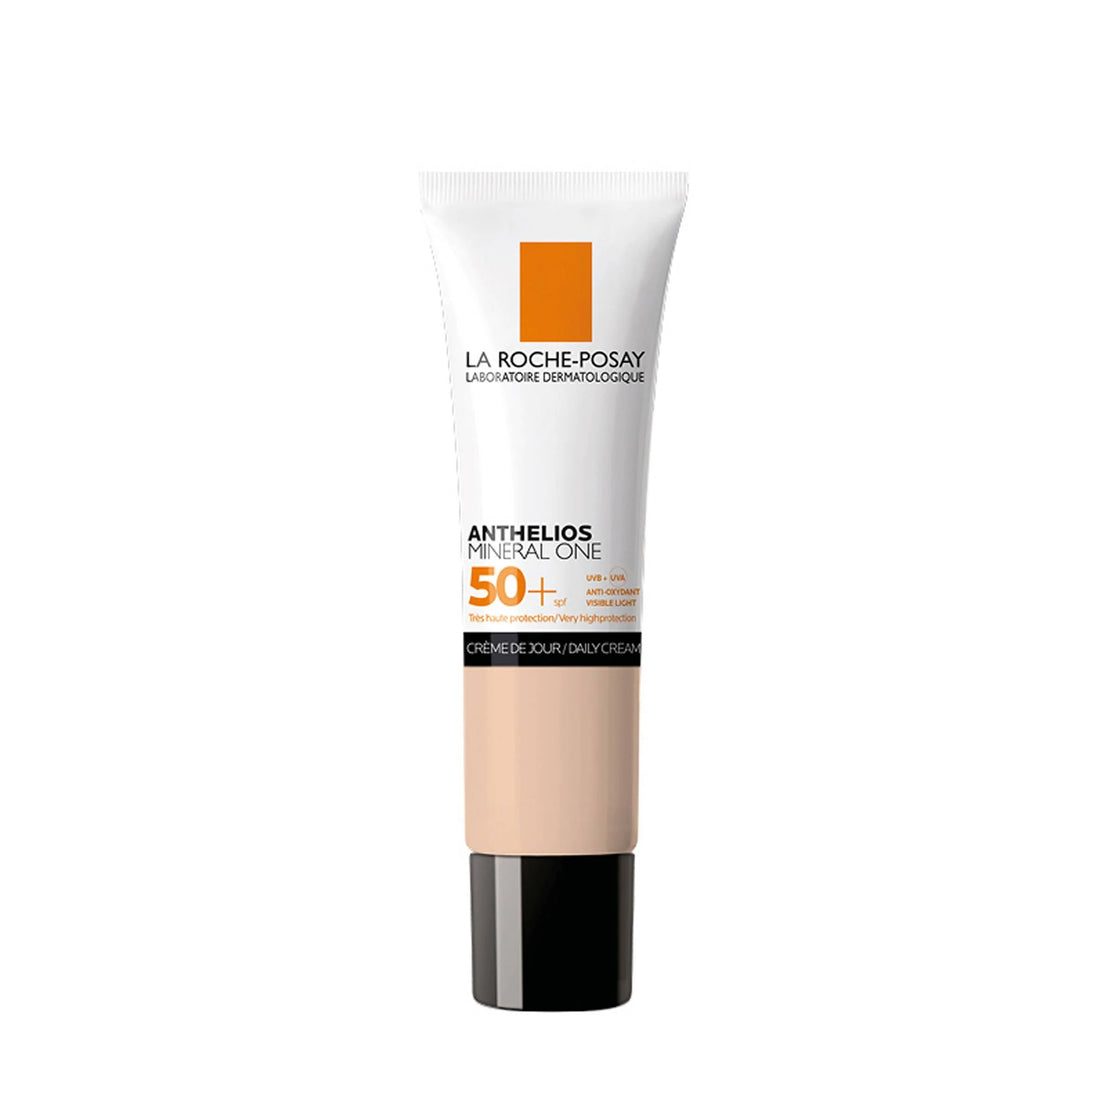 La Roche-Posay Anthelios Mineral One SPF50+ Tinted Cream 01 Light 30ml